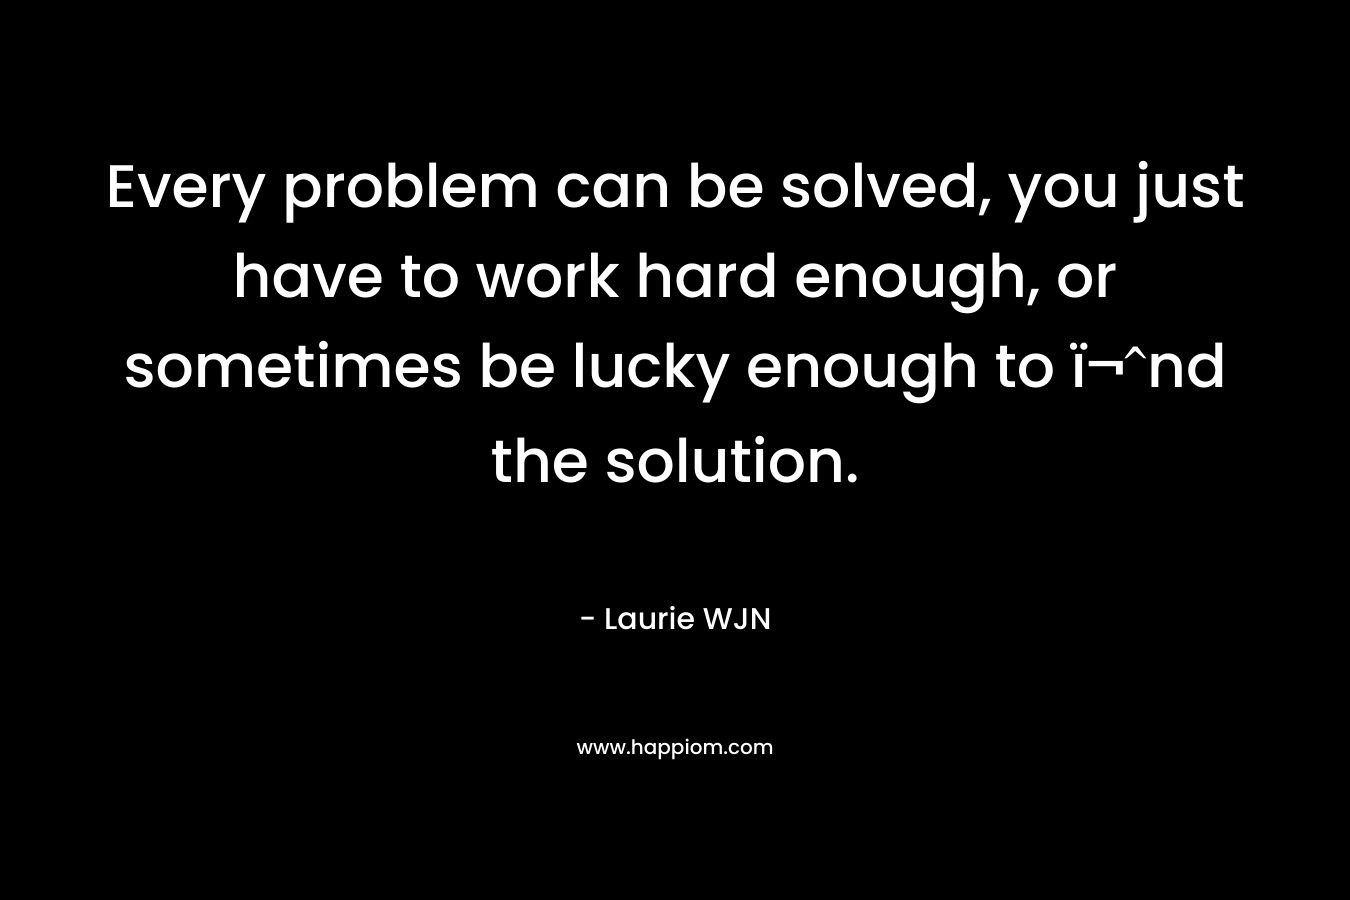 Every problem can be solved, you just have to work hard enough, or sometimes be lucky enough to ï¬nd the solution. – Laurie WJN